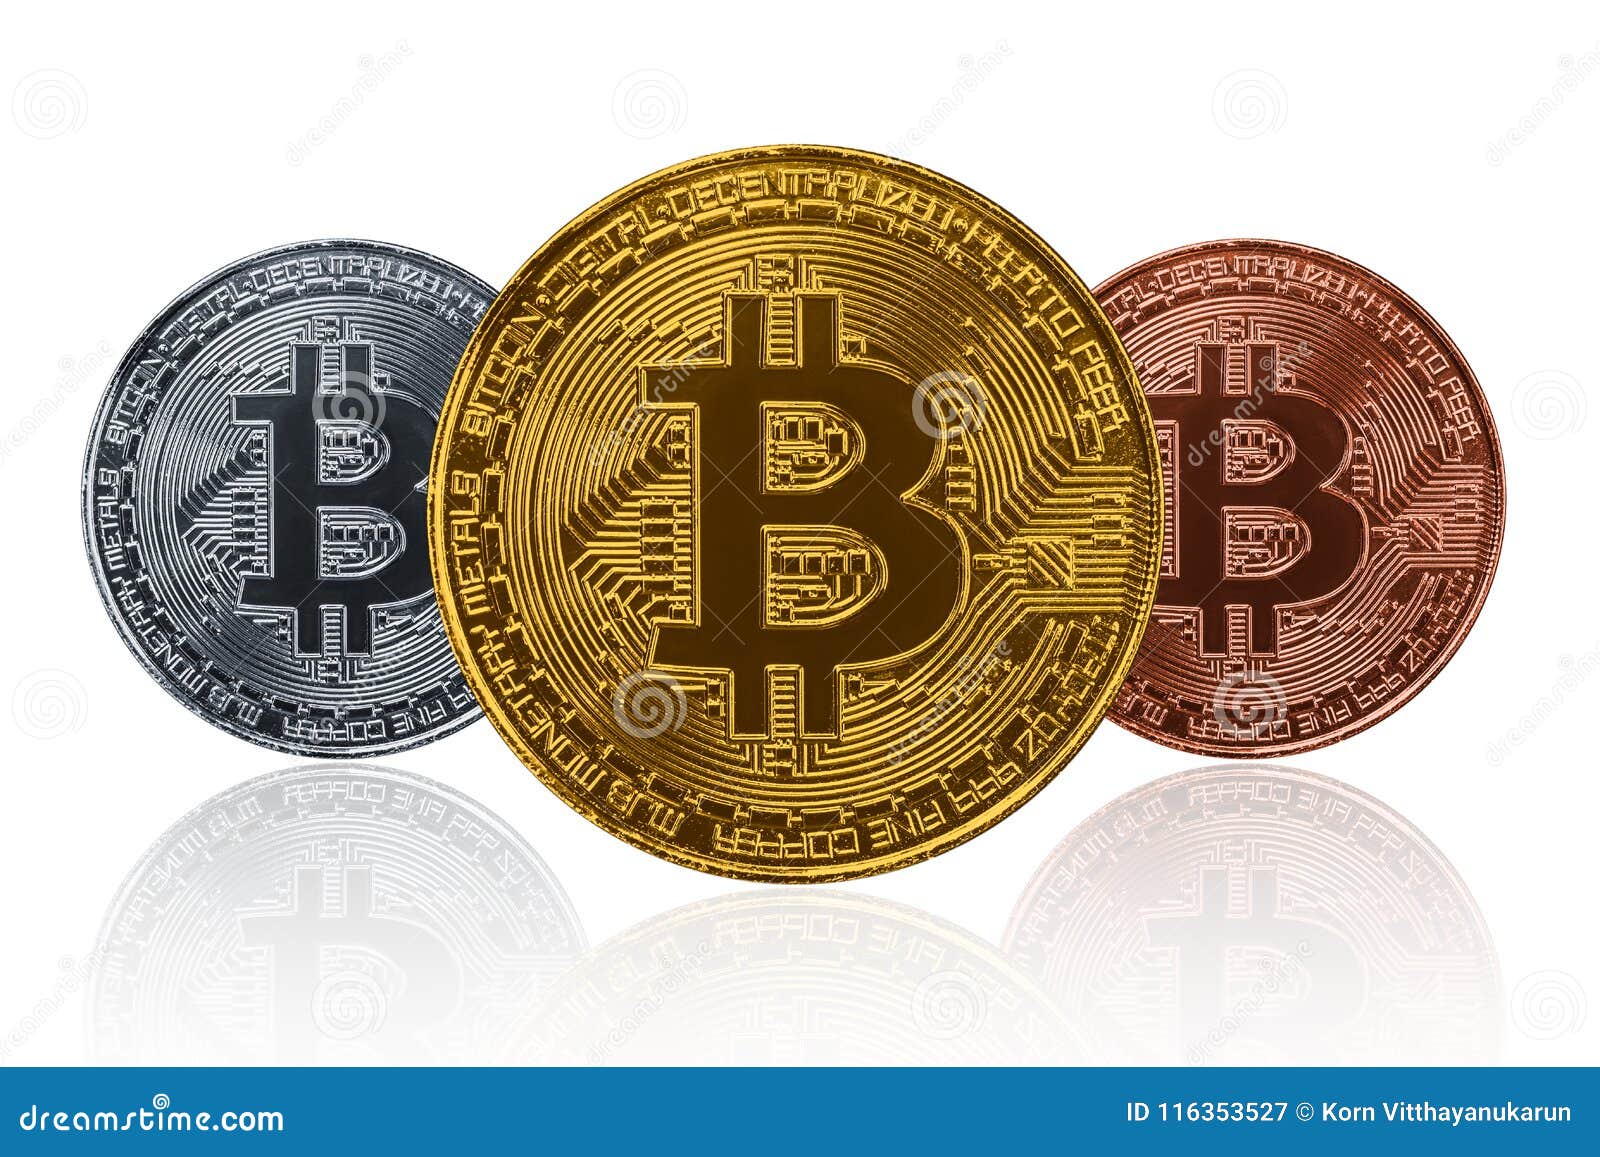 other types of bitcoins